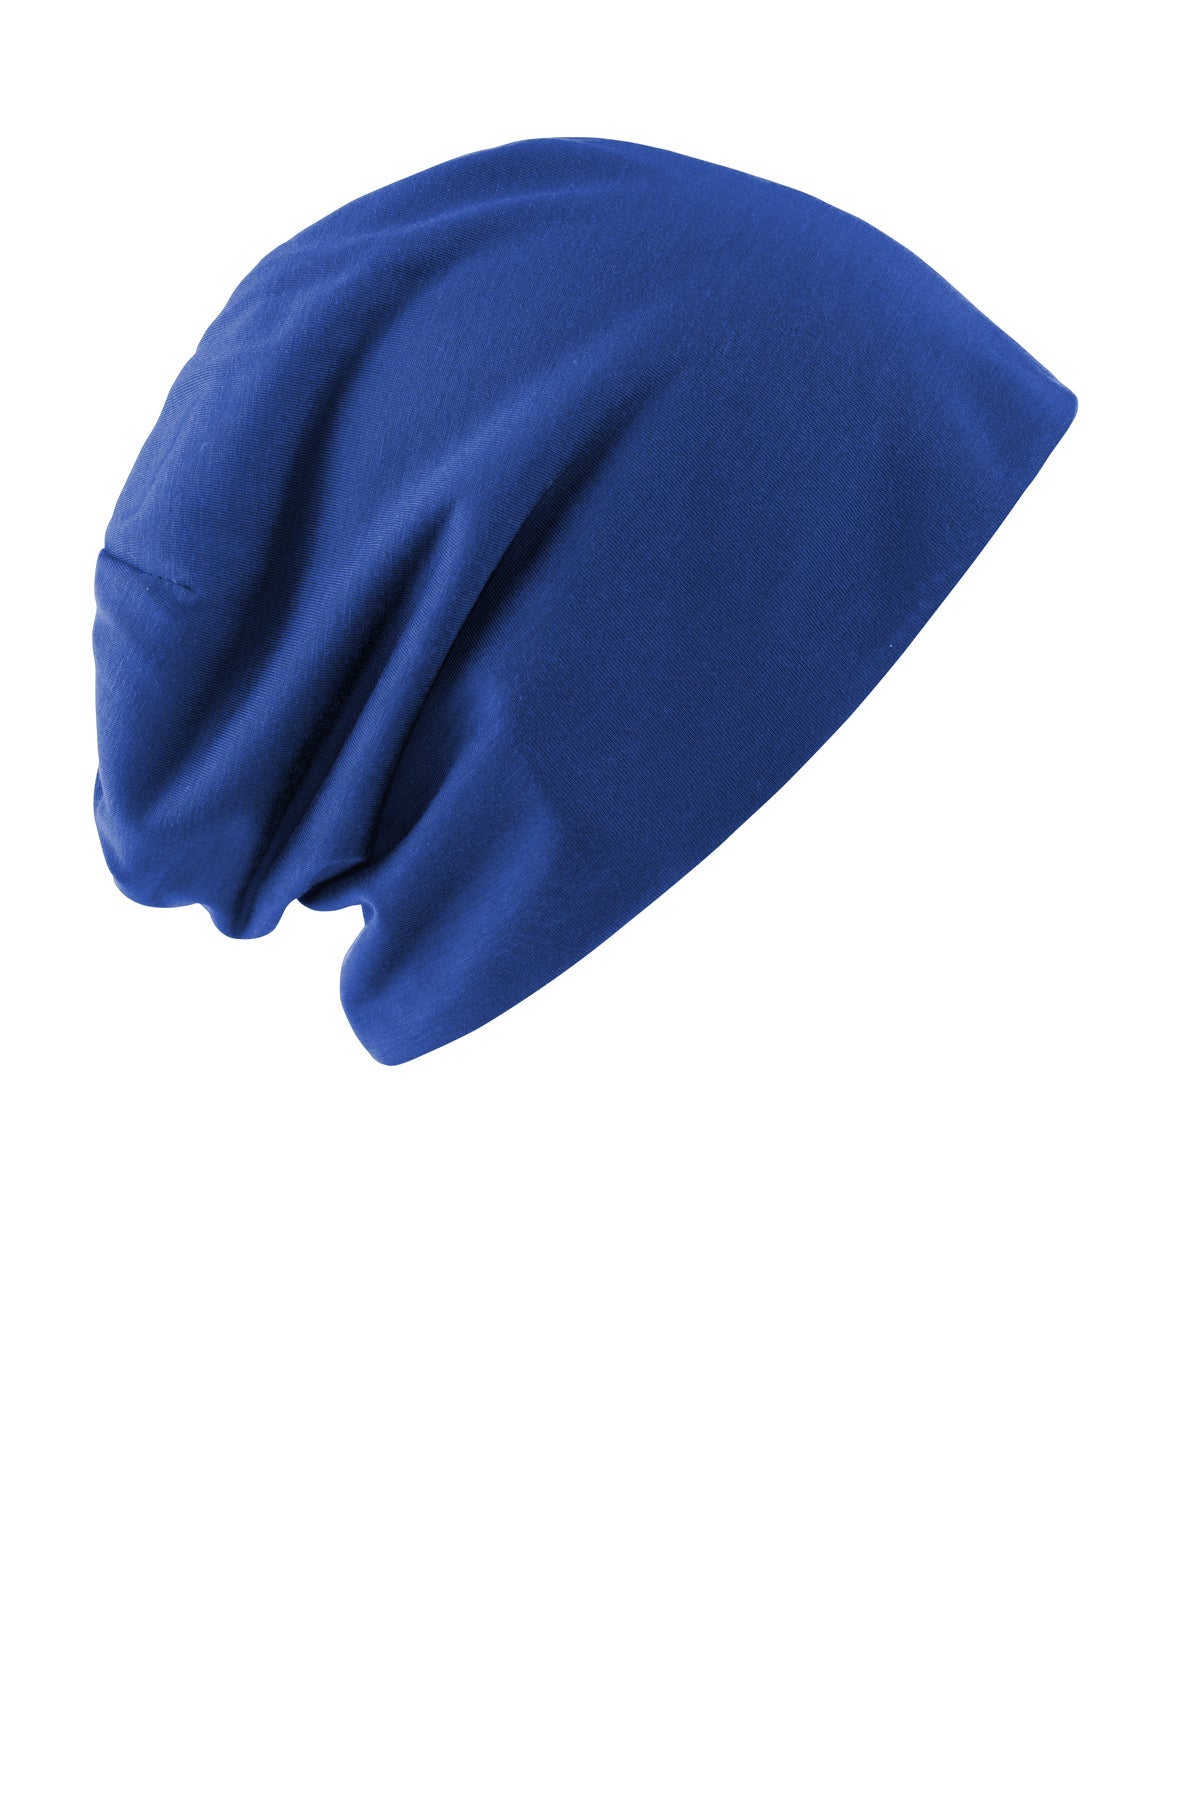 Sport-Tek PosiCharge Competitor Cotton Branded Touch Slouch Beanies, True Royal